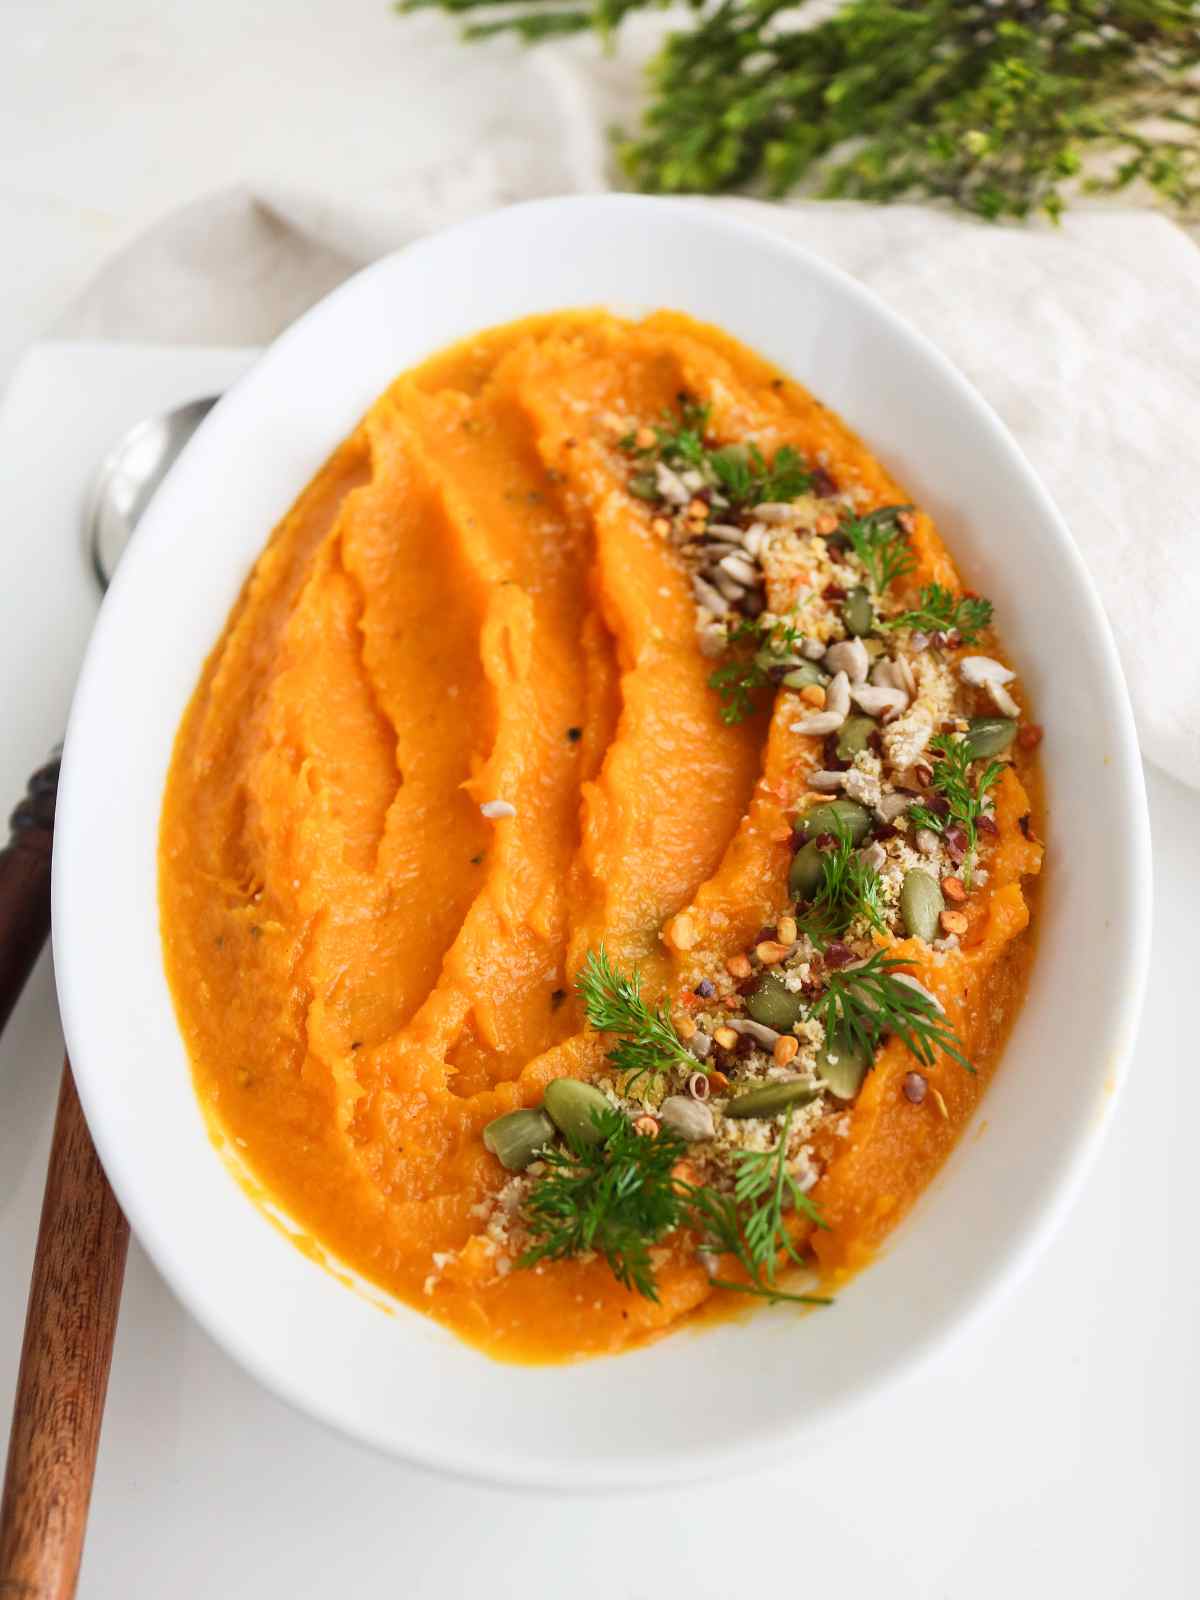 Mashed butternut squash garnished and served in a dish.